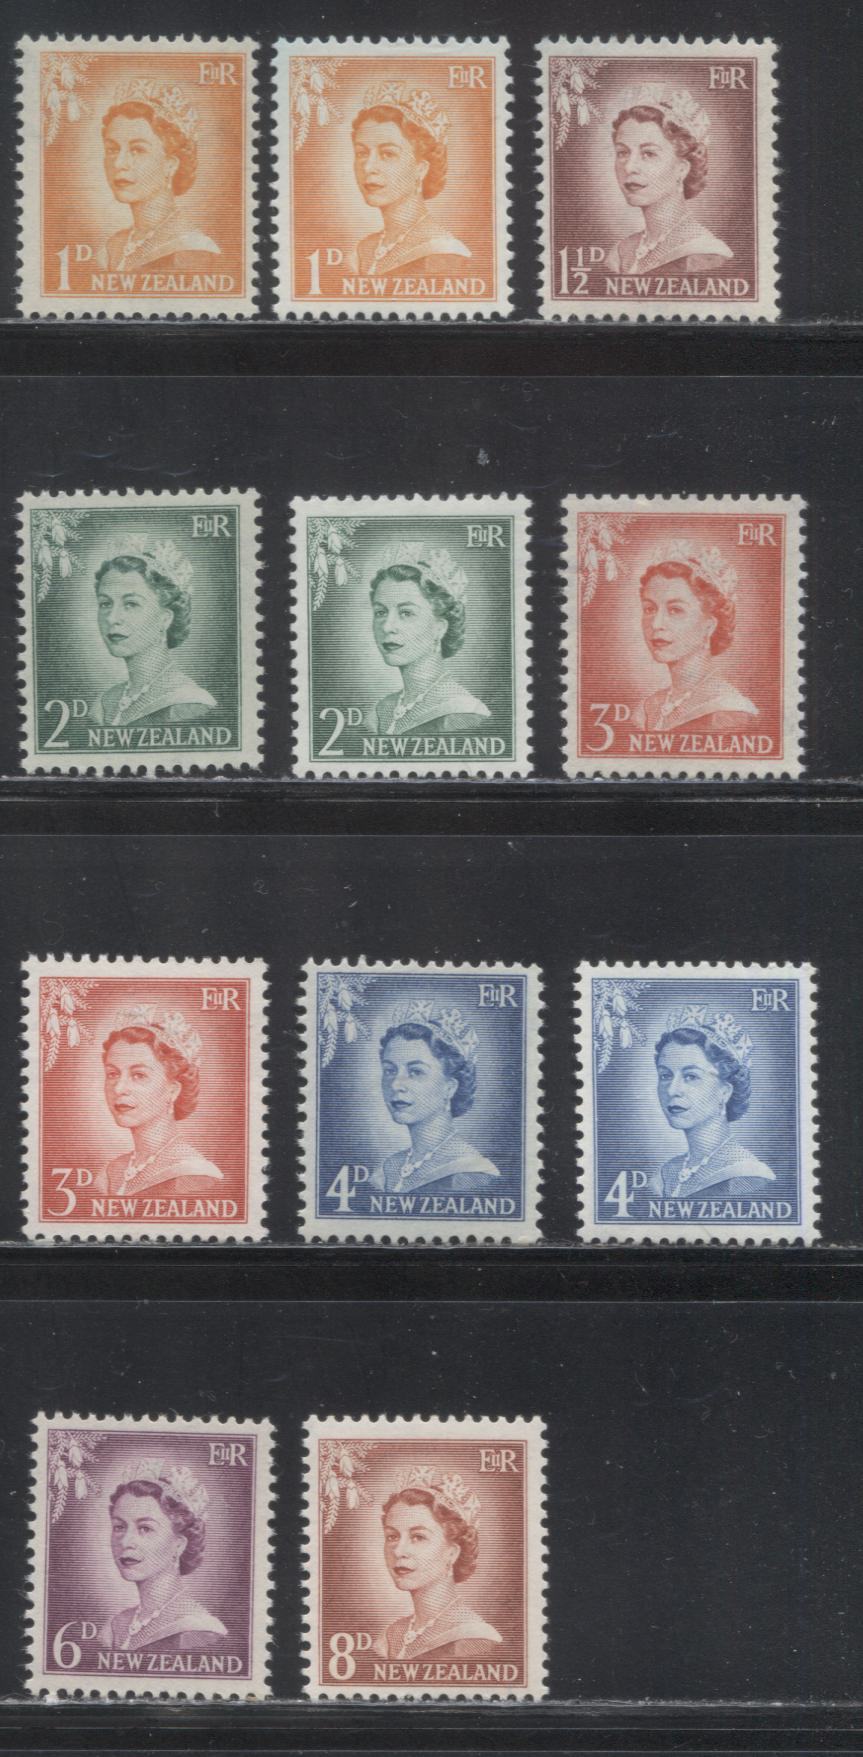 Lot 188 New Zealand SG#745-751 1d Orange - 8d Red Brown, 1955-1959 Bradbury Wilkinson Issue, a Mostly VFNH Set, Including The Opaque Papers